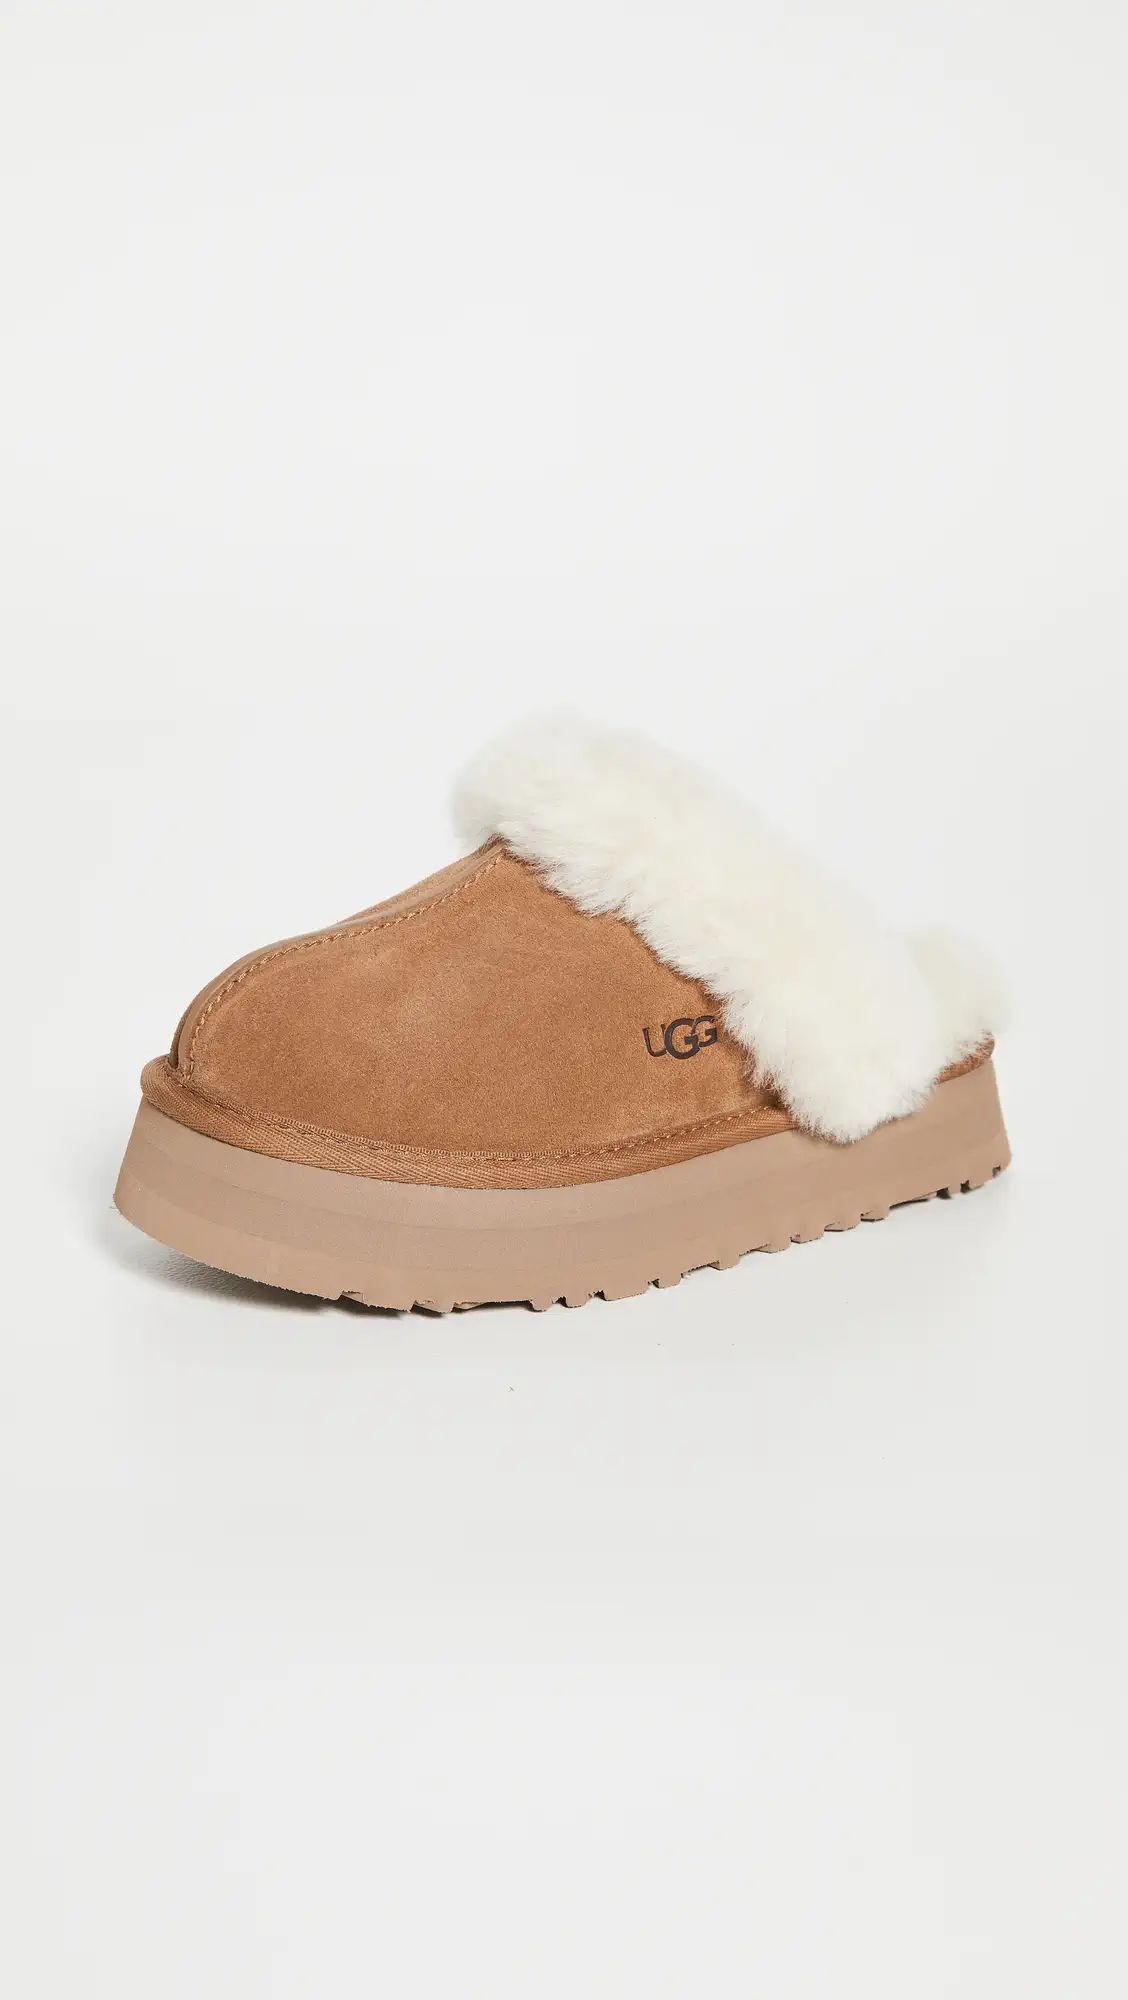 UGG Disquette Slippers | Shopbop | Shopbop